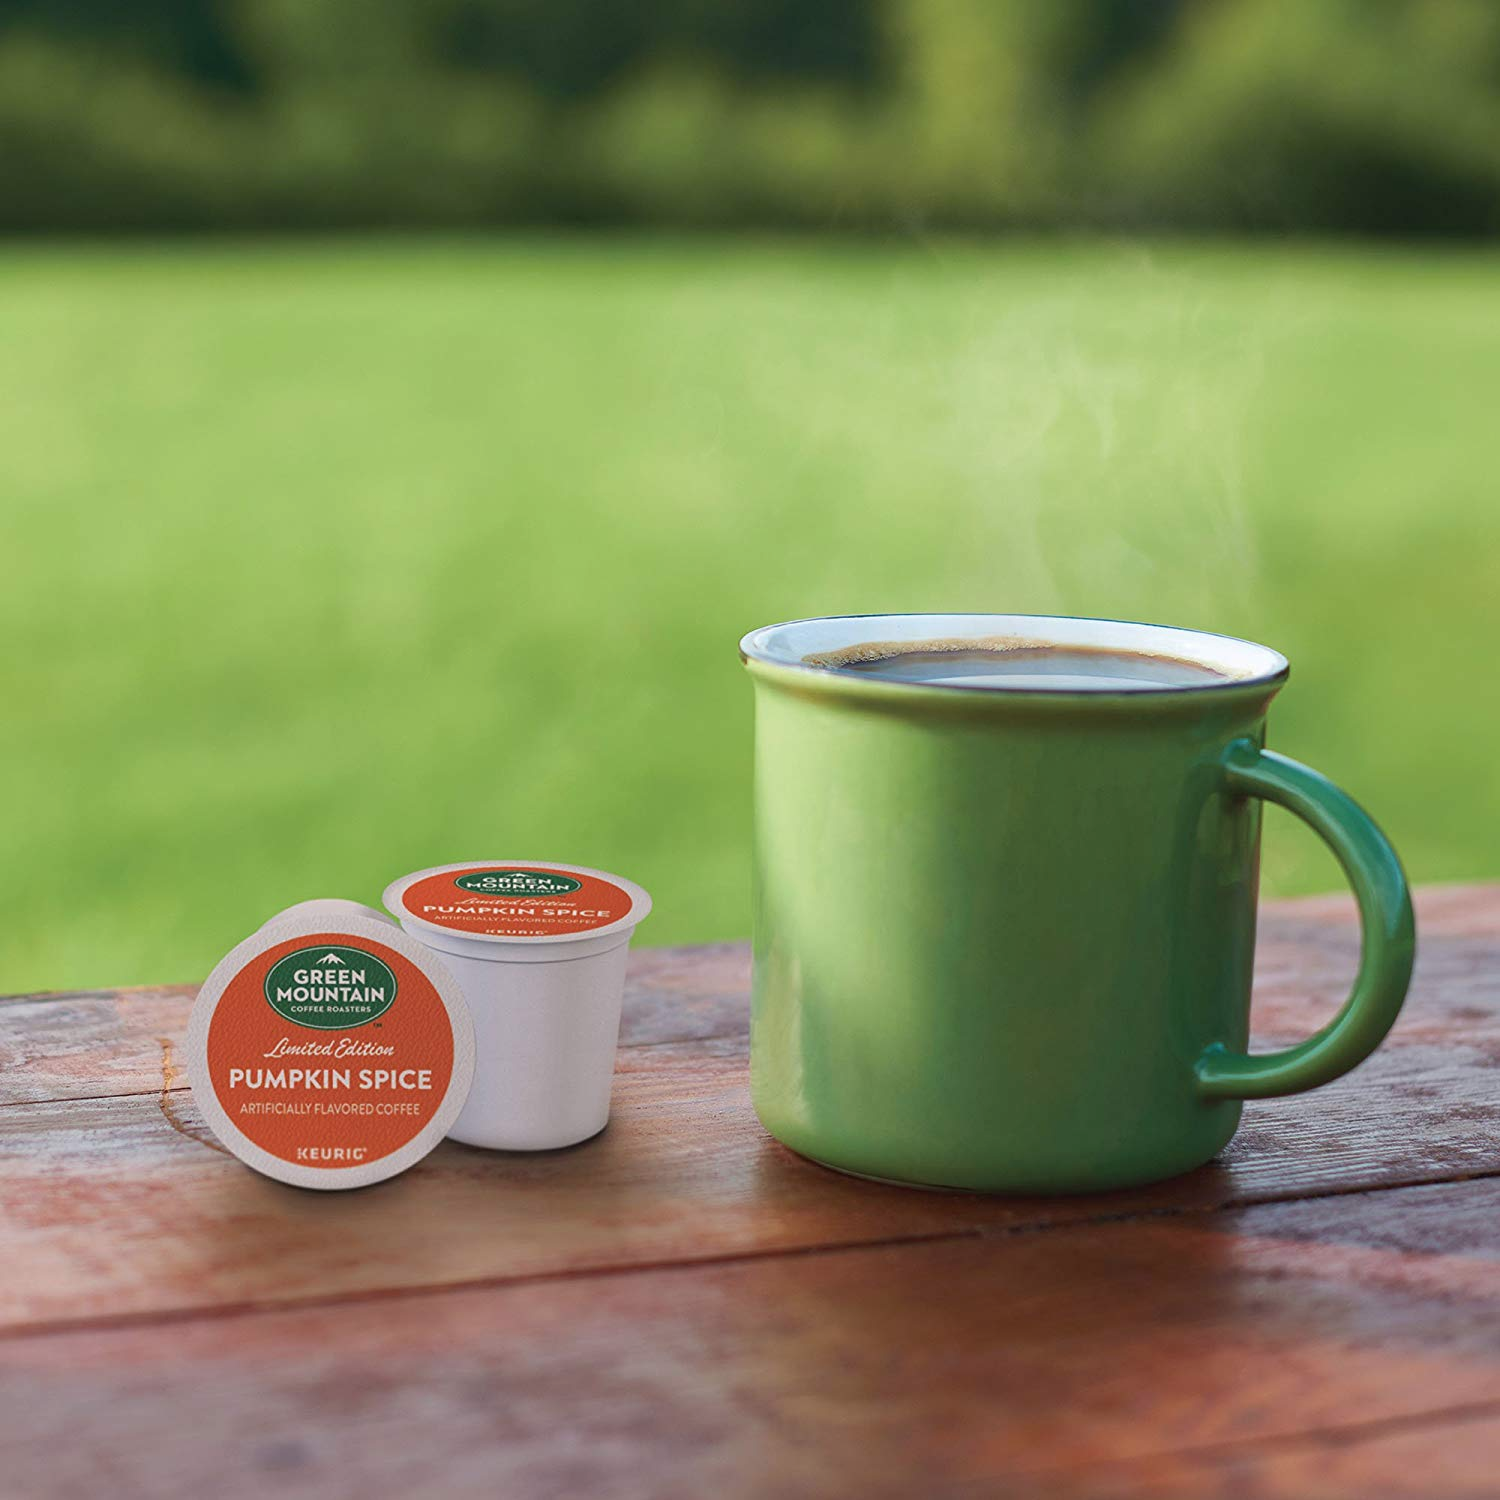 Is it basic or is it delicious? Get comfortable with the things you enjoy.<br><br>Pumpkin spice Keurig pods are available<a href="https://amzn.to/2znFFxn" "nofollow" target="_blank">here</a>.